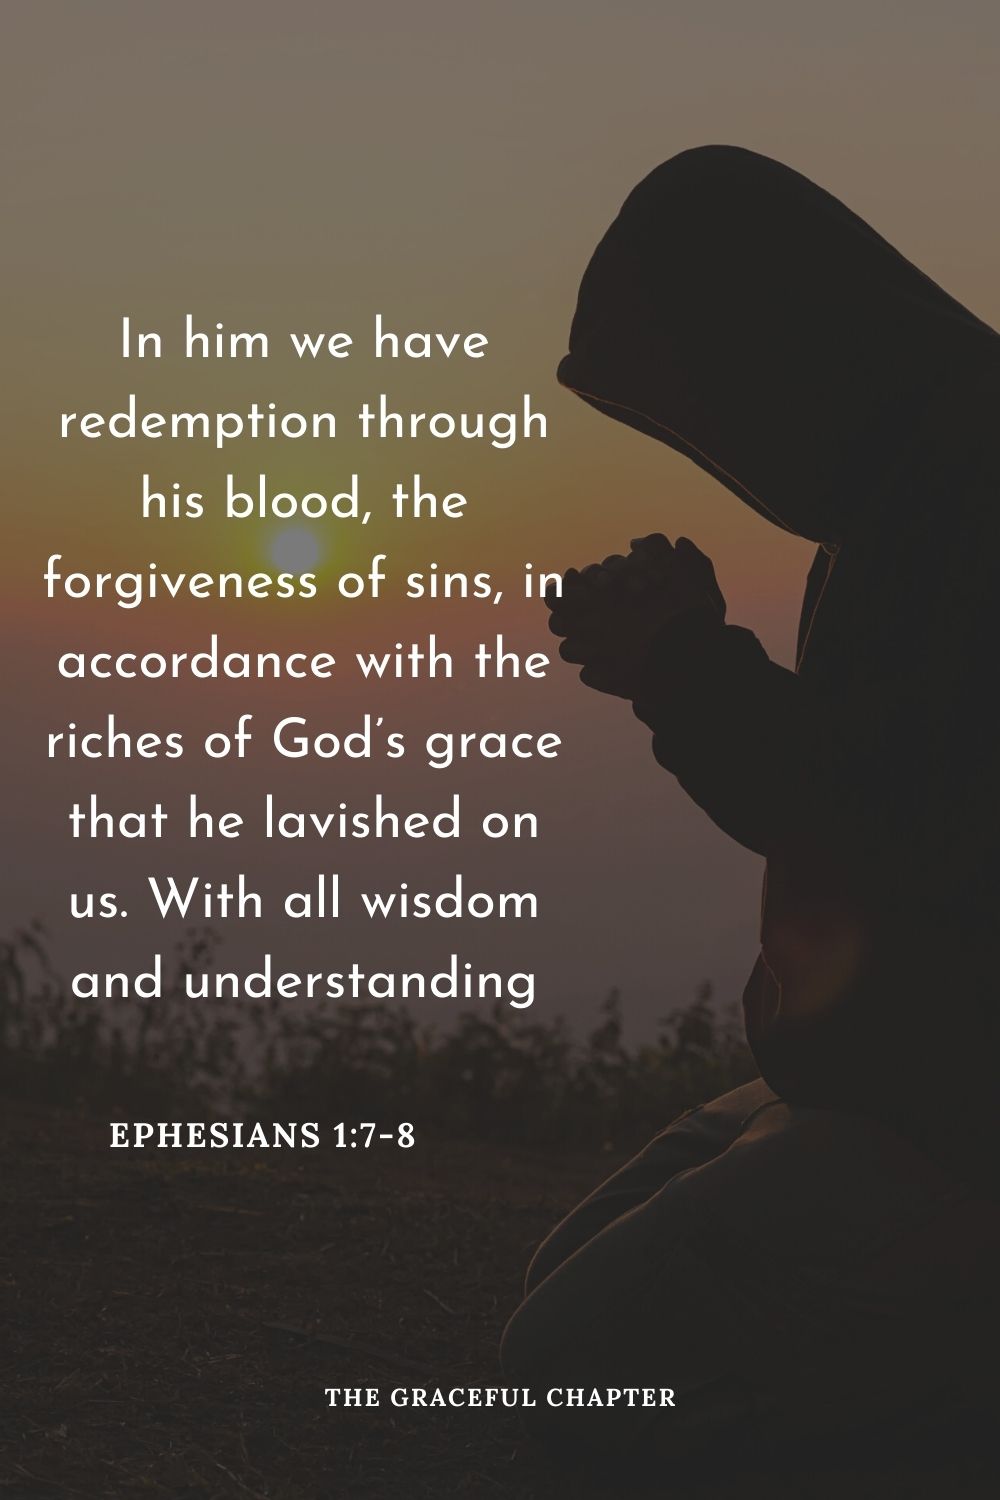 In him we have redemption through his blood, the forgiveness of sins, in accordance with the riches of God’s grace that he lavished on us. With all wisdom and understanding.